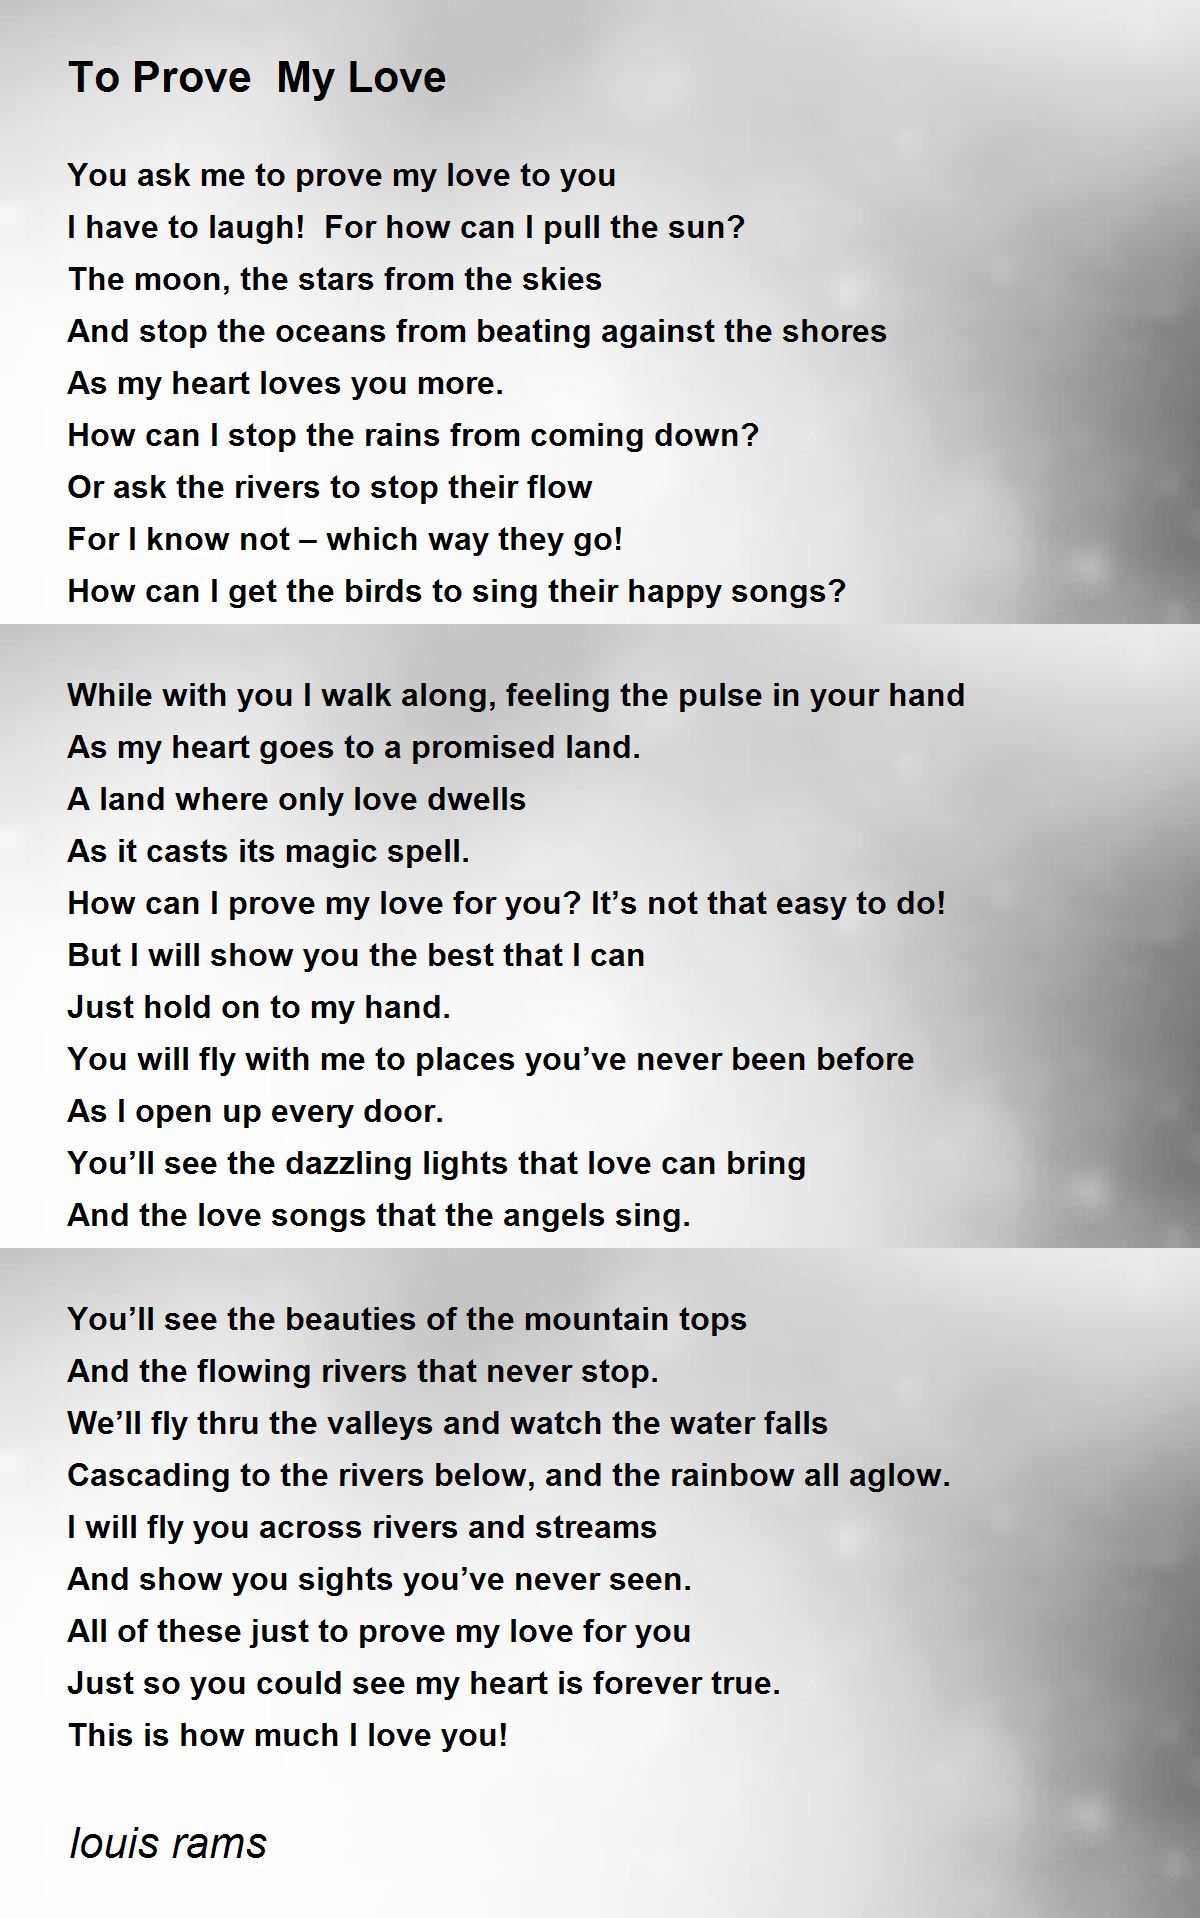 To Prove My Love - To Prove My Love Poem by louis rams